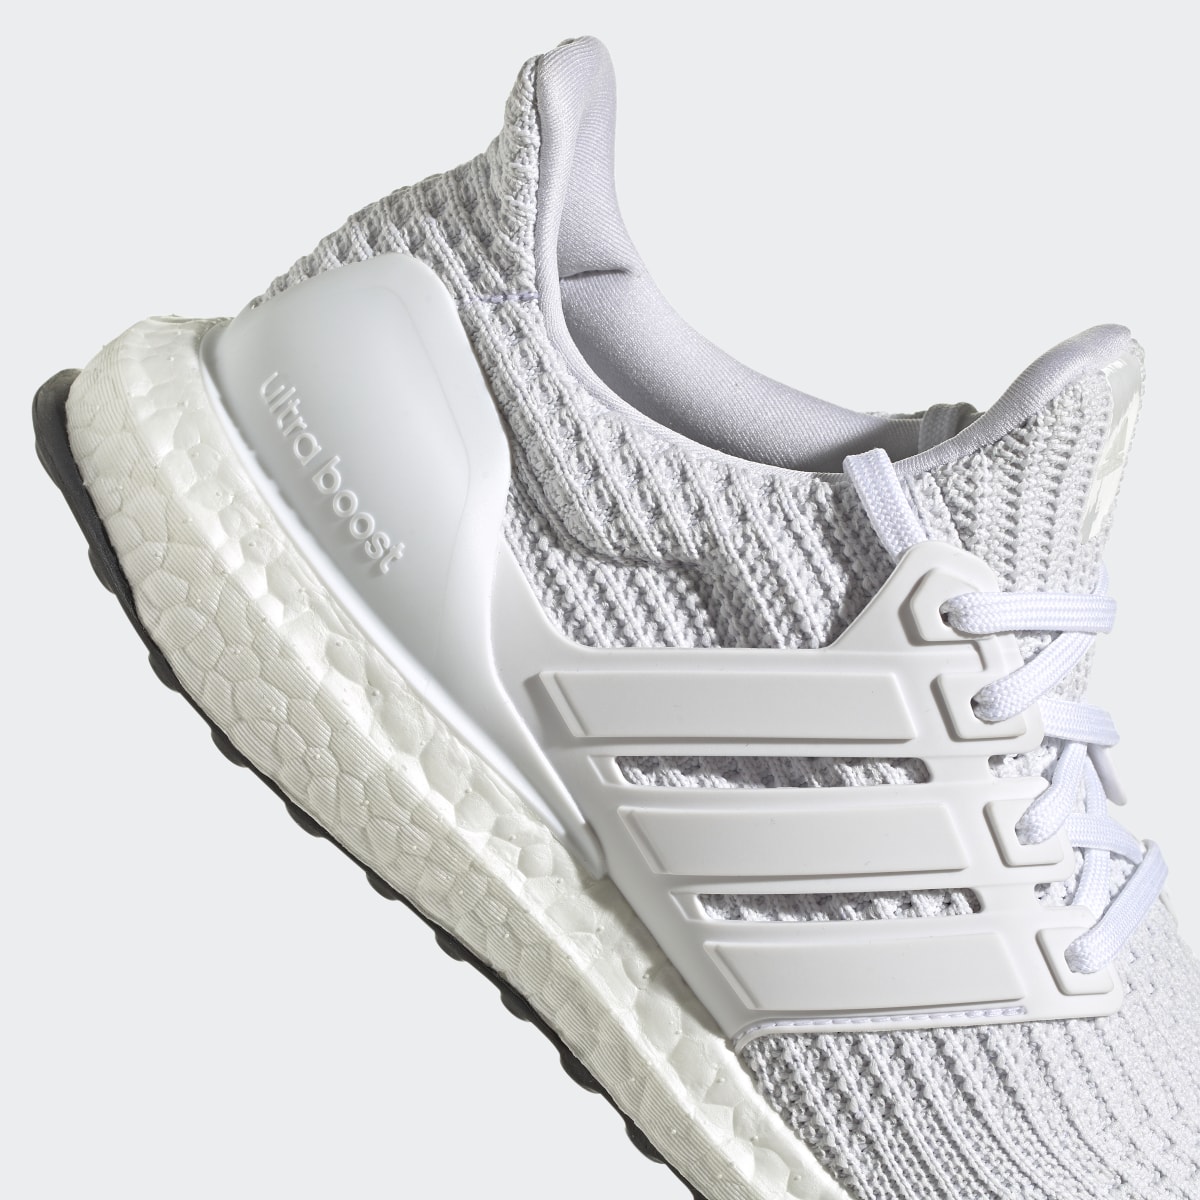 Adidas Ultraboost 4.0 DNA Shoes. 10